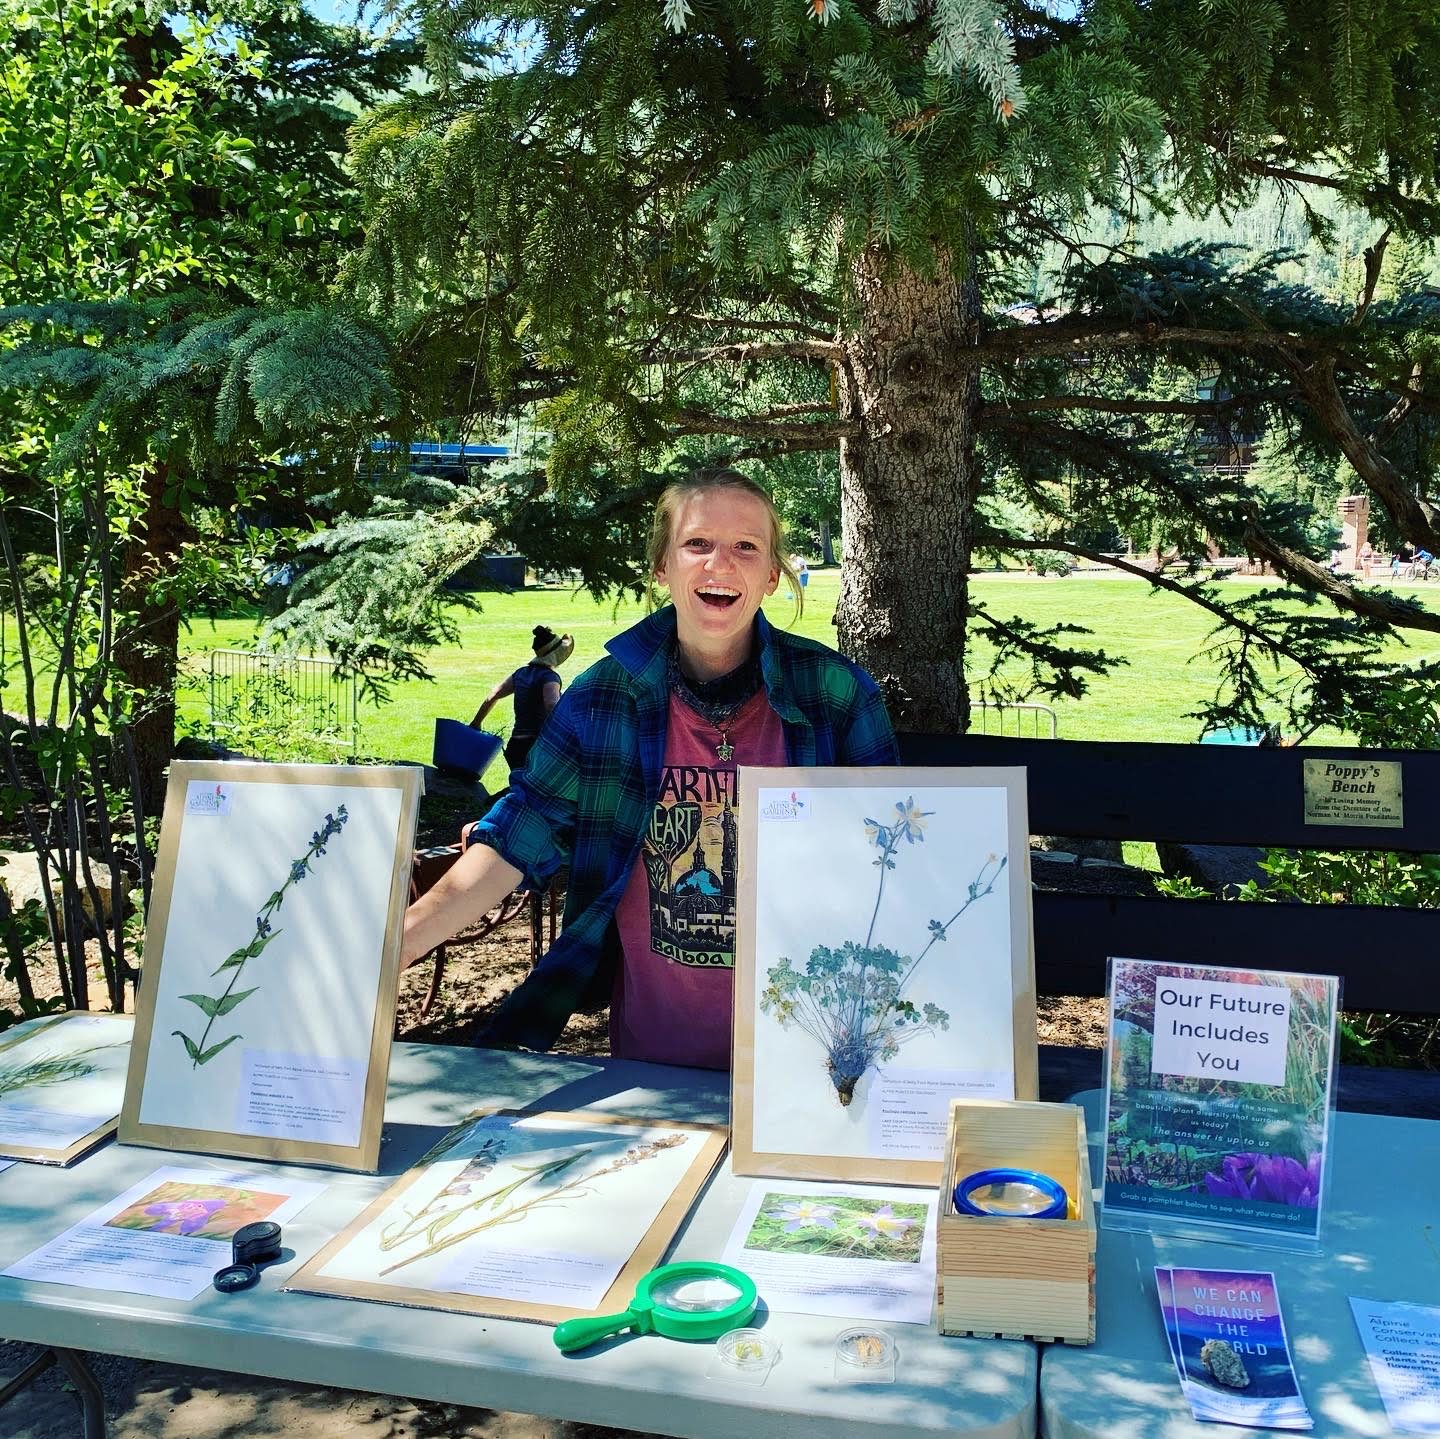 Tenaya, 2020 Education Intern, at the Conservation Table in the Betty Ford Alpine Gardens